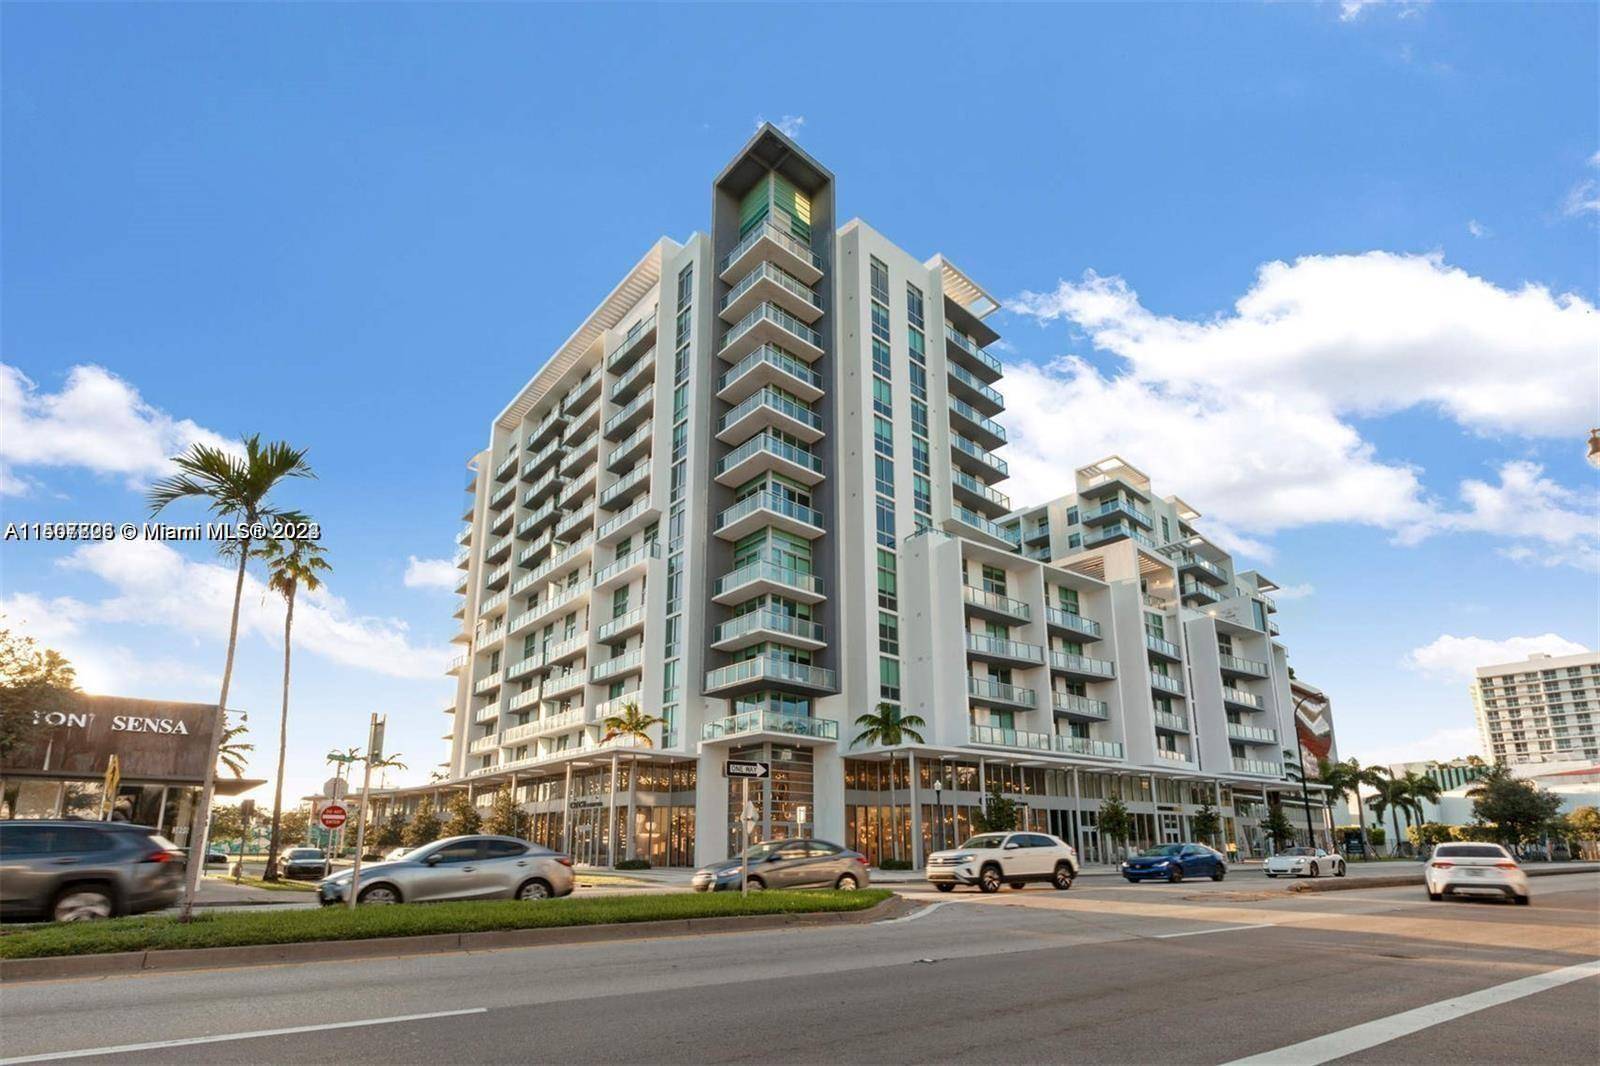 Exciting opportunity to own a luminous and spacious 1 bedroom condo in one of the latest condominium developments within the vibrant Miami Design District.